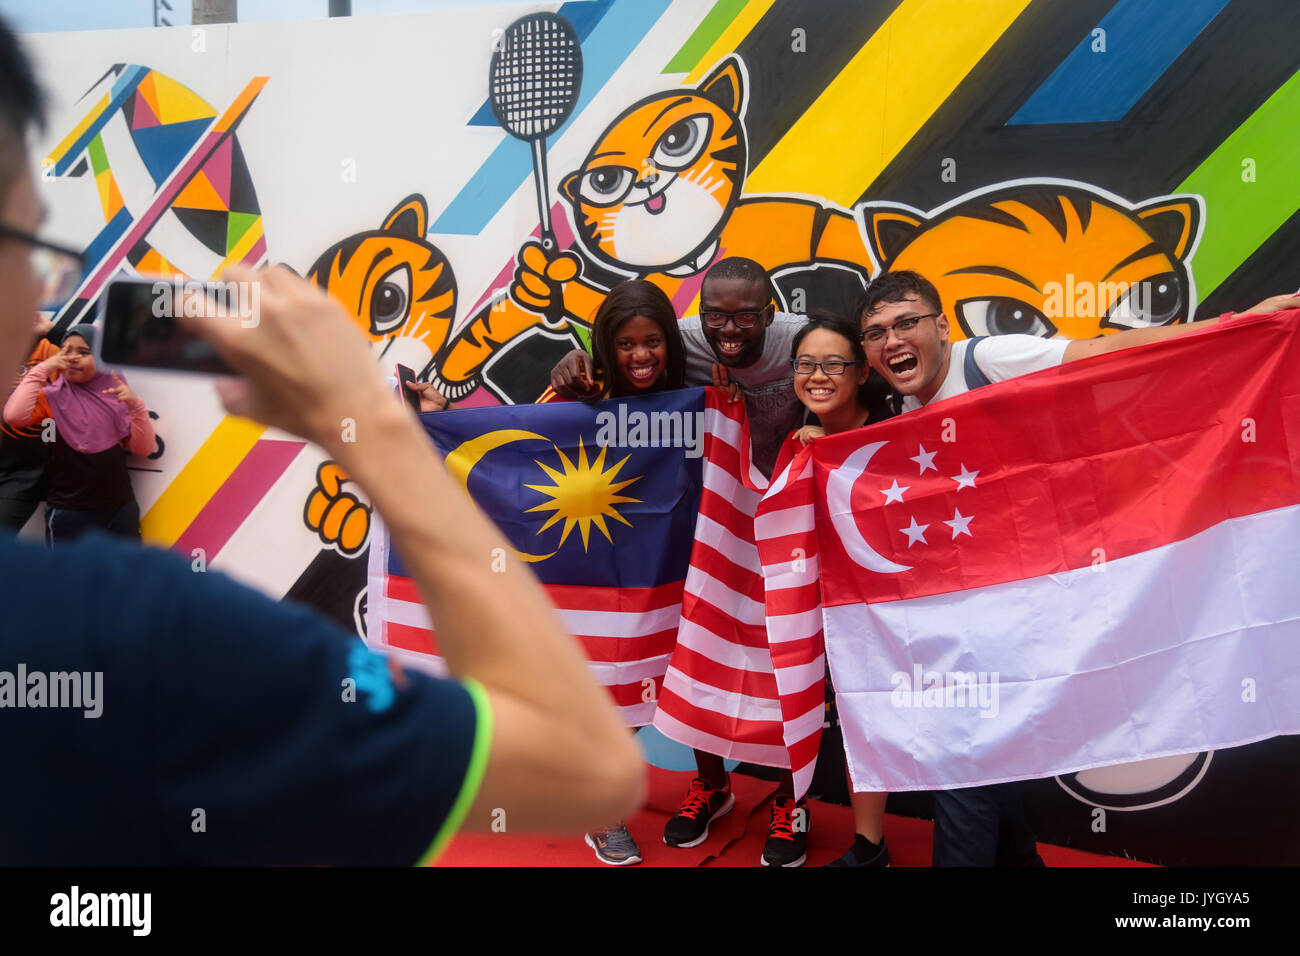 Foreigners taking picture with the official SEA games signboard during opening ceremony of the 29th SEA games. Credit: Calvin Chan/Alamy Live News Stock Photo